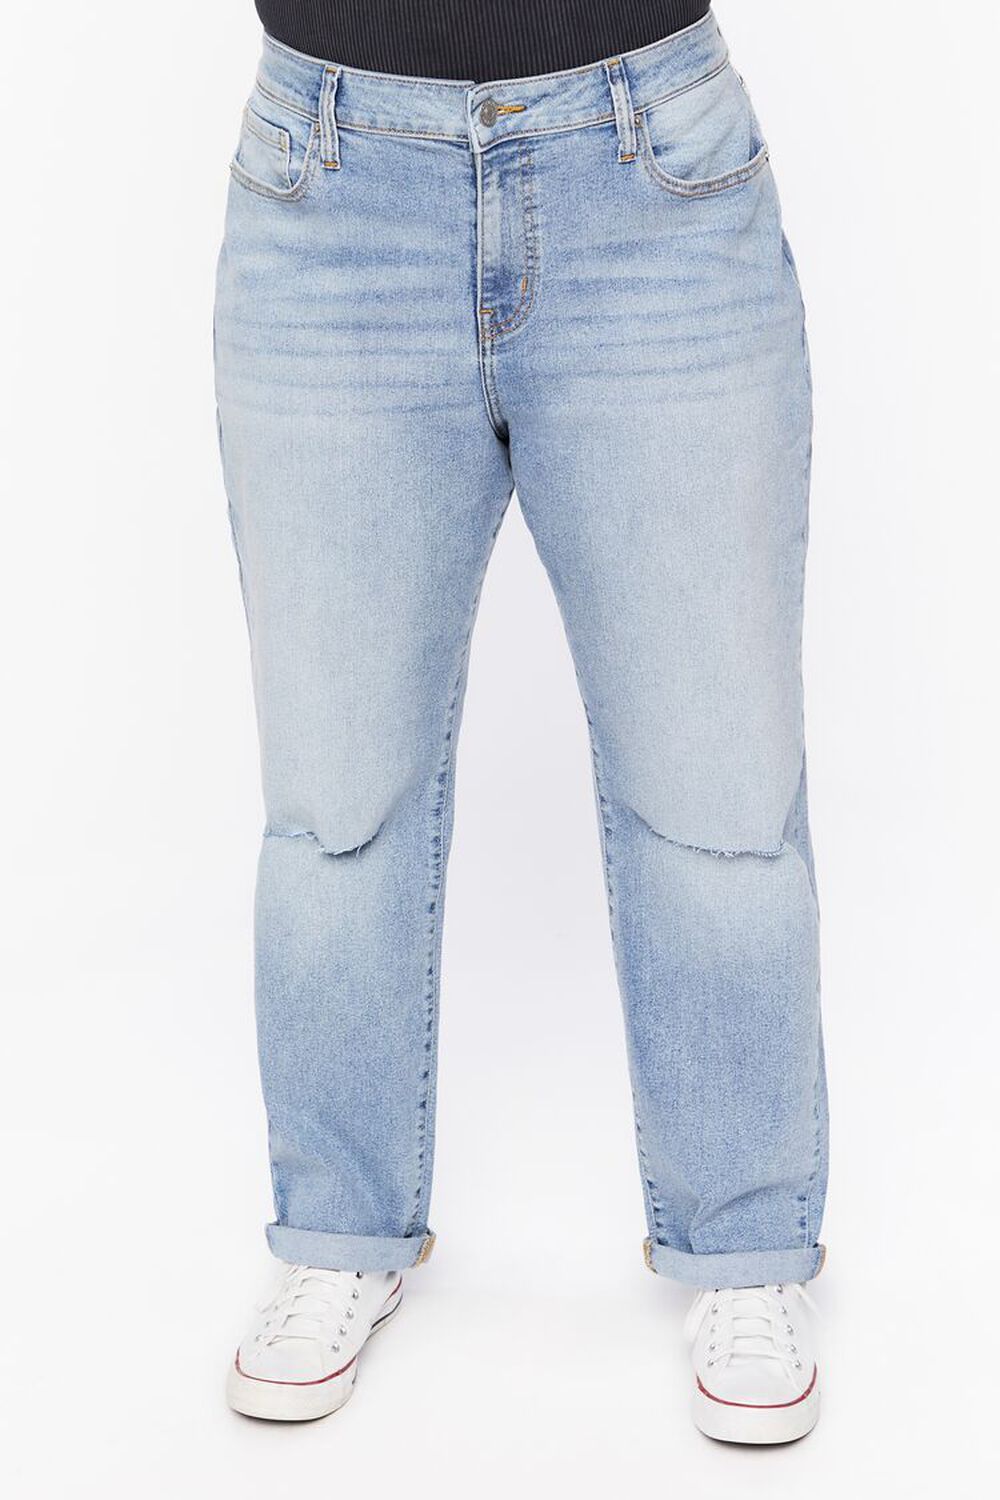 Plus Size Distressed Baggy Jeans